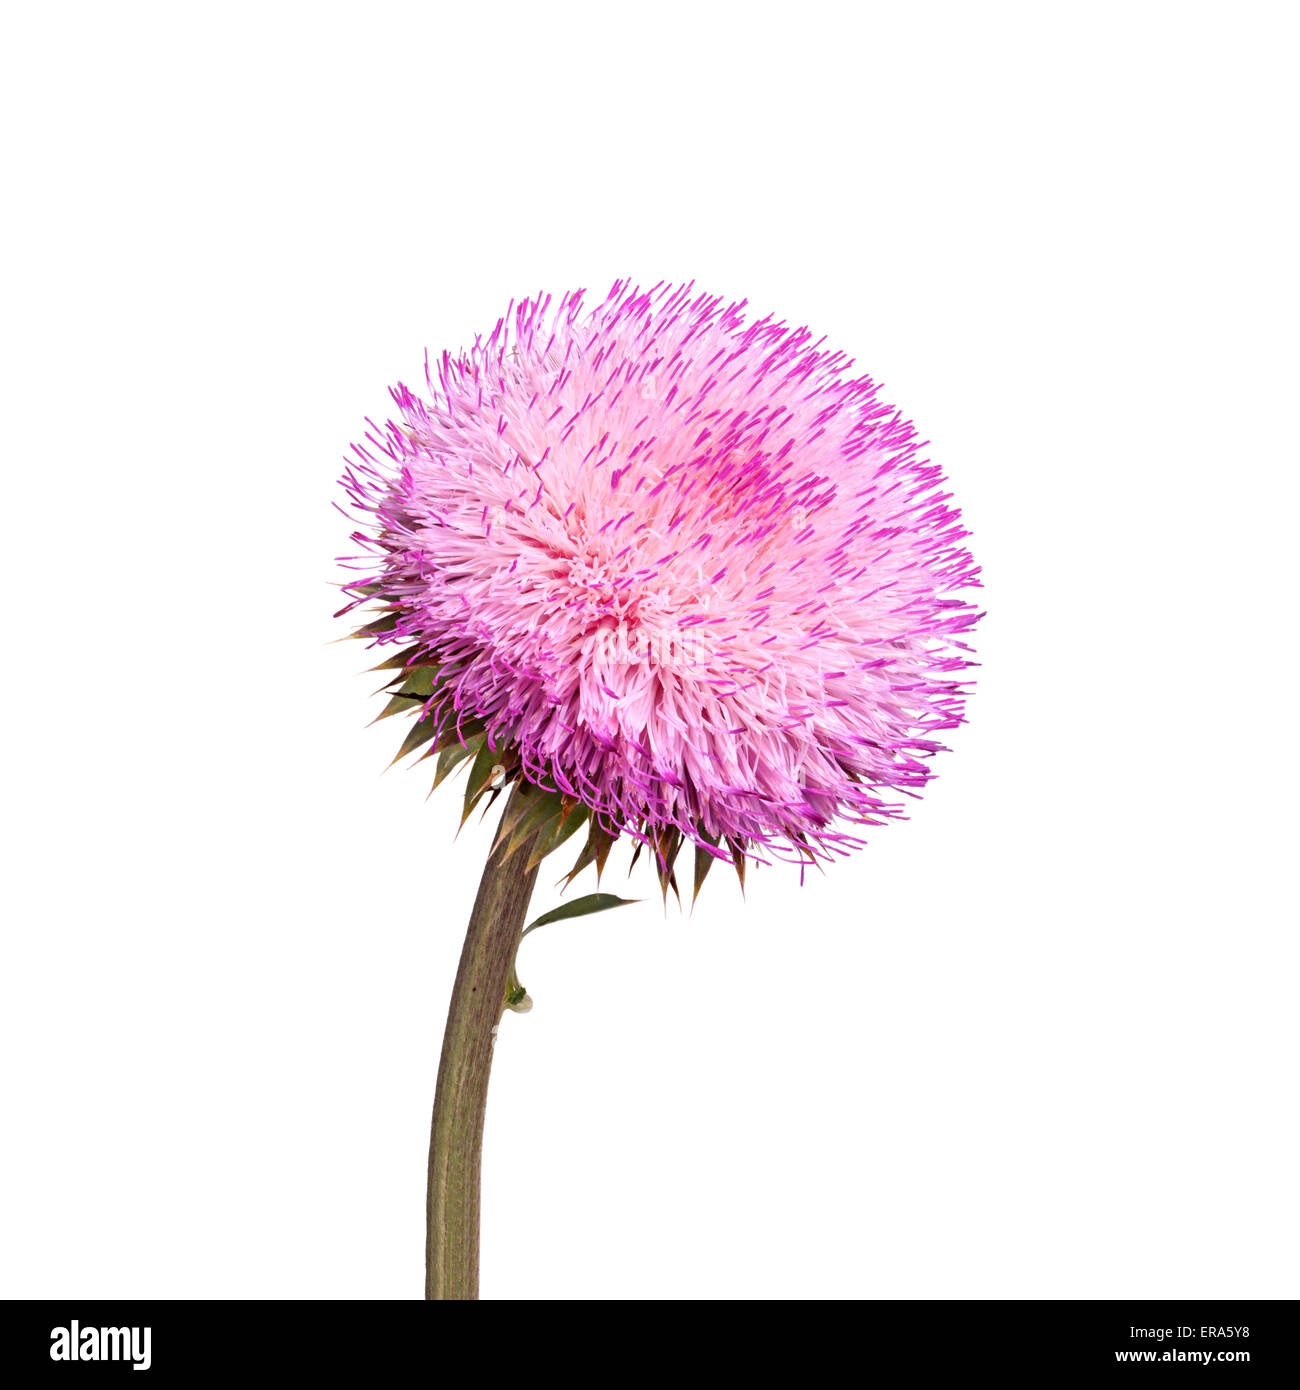 Compound flower of musk thistle (Carduus nutans) isolated against a white background Stock Photo